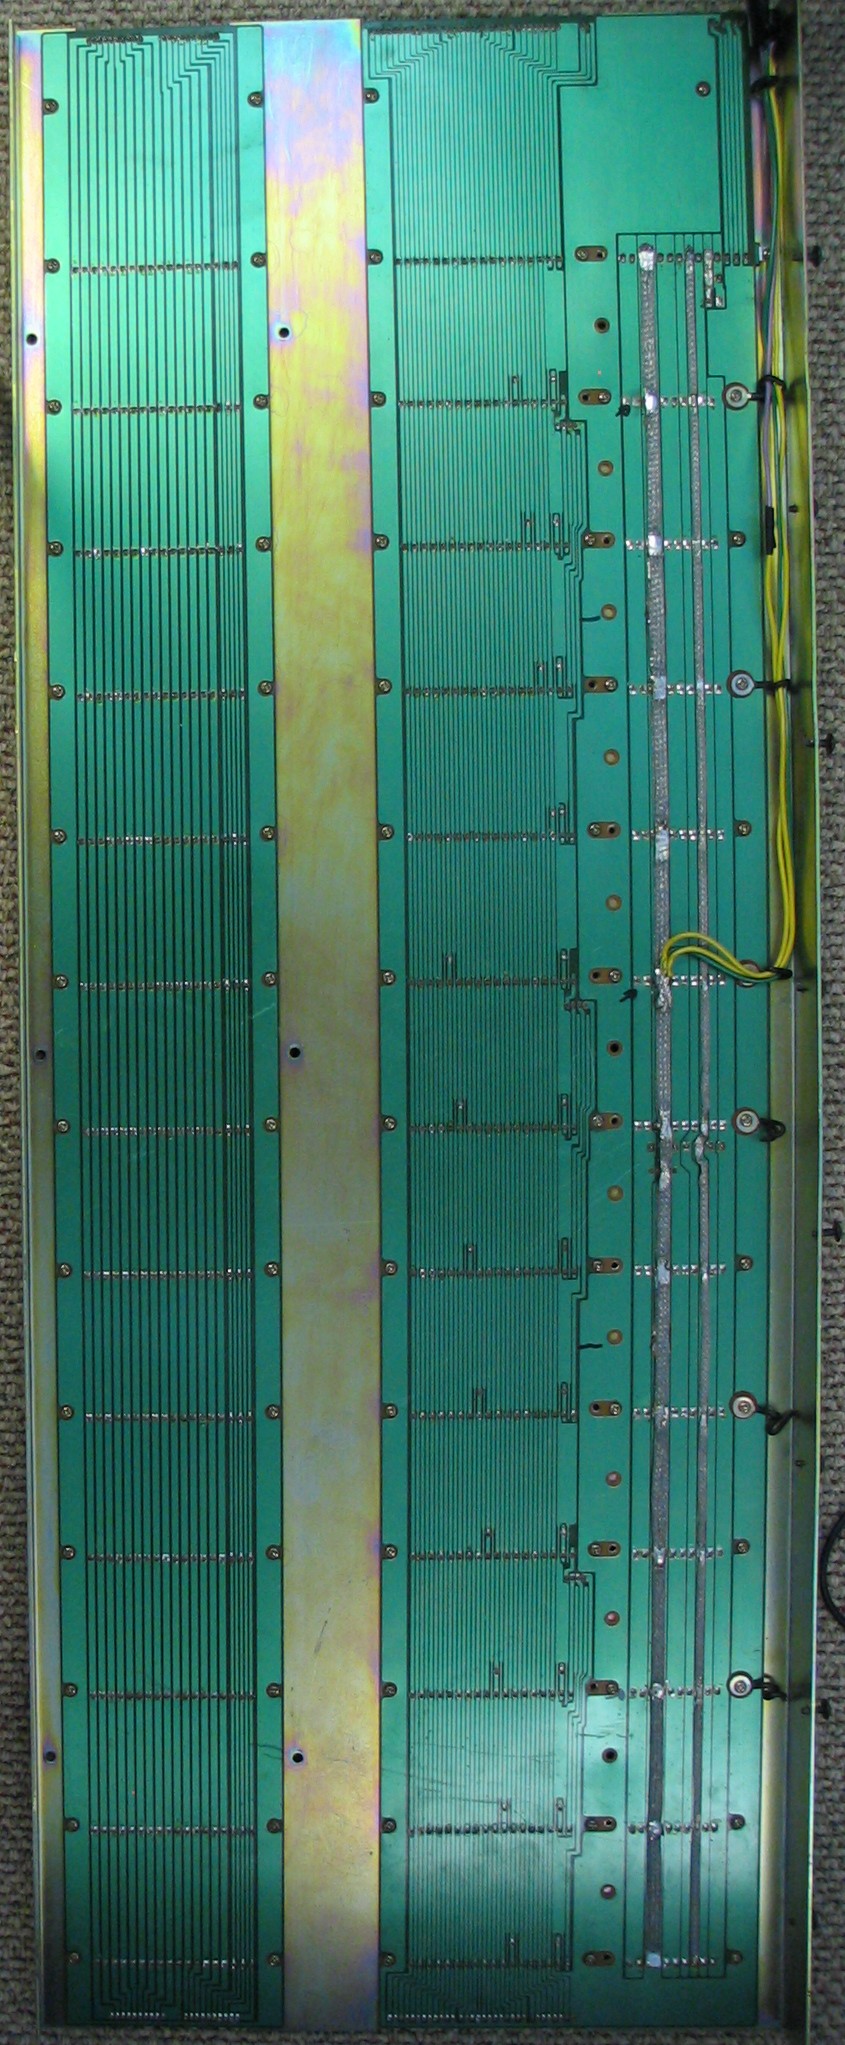 Mother%20A%20and%20B%20PCB's.jpg